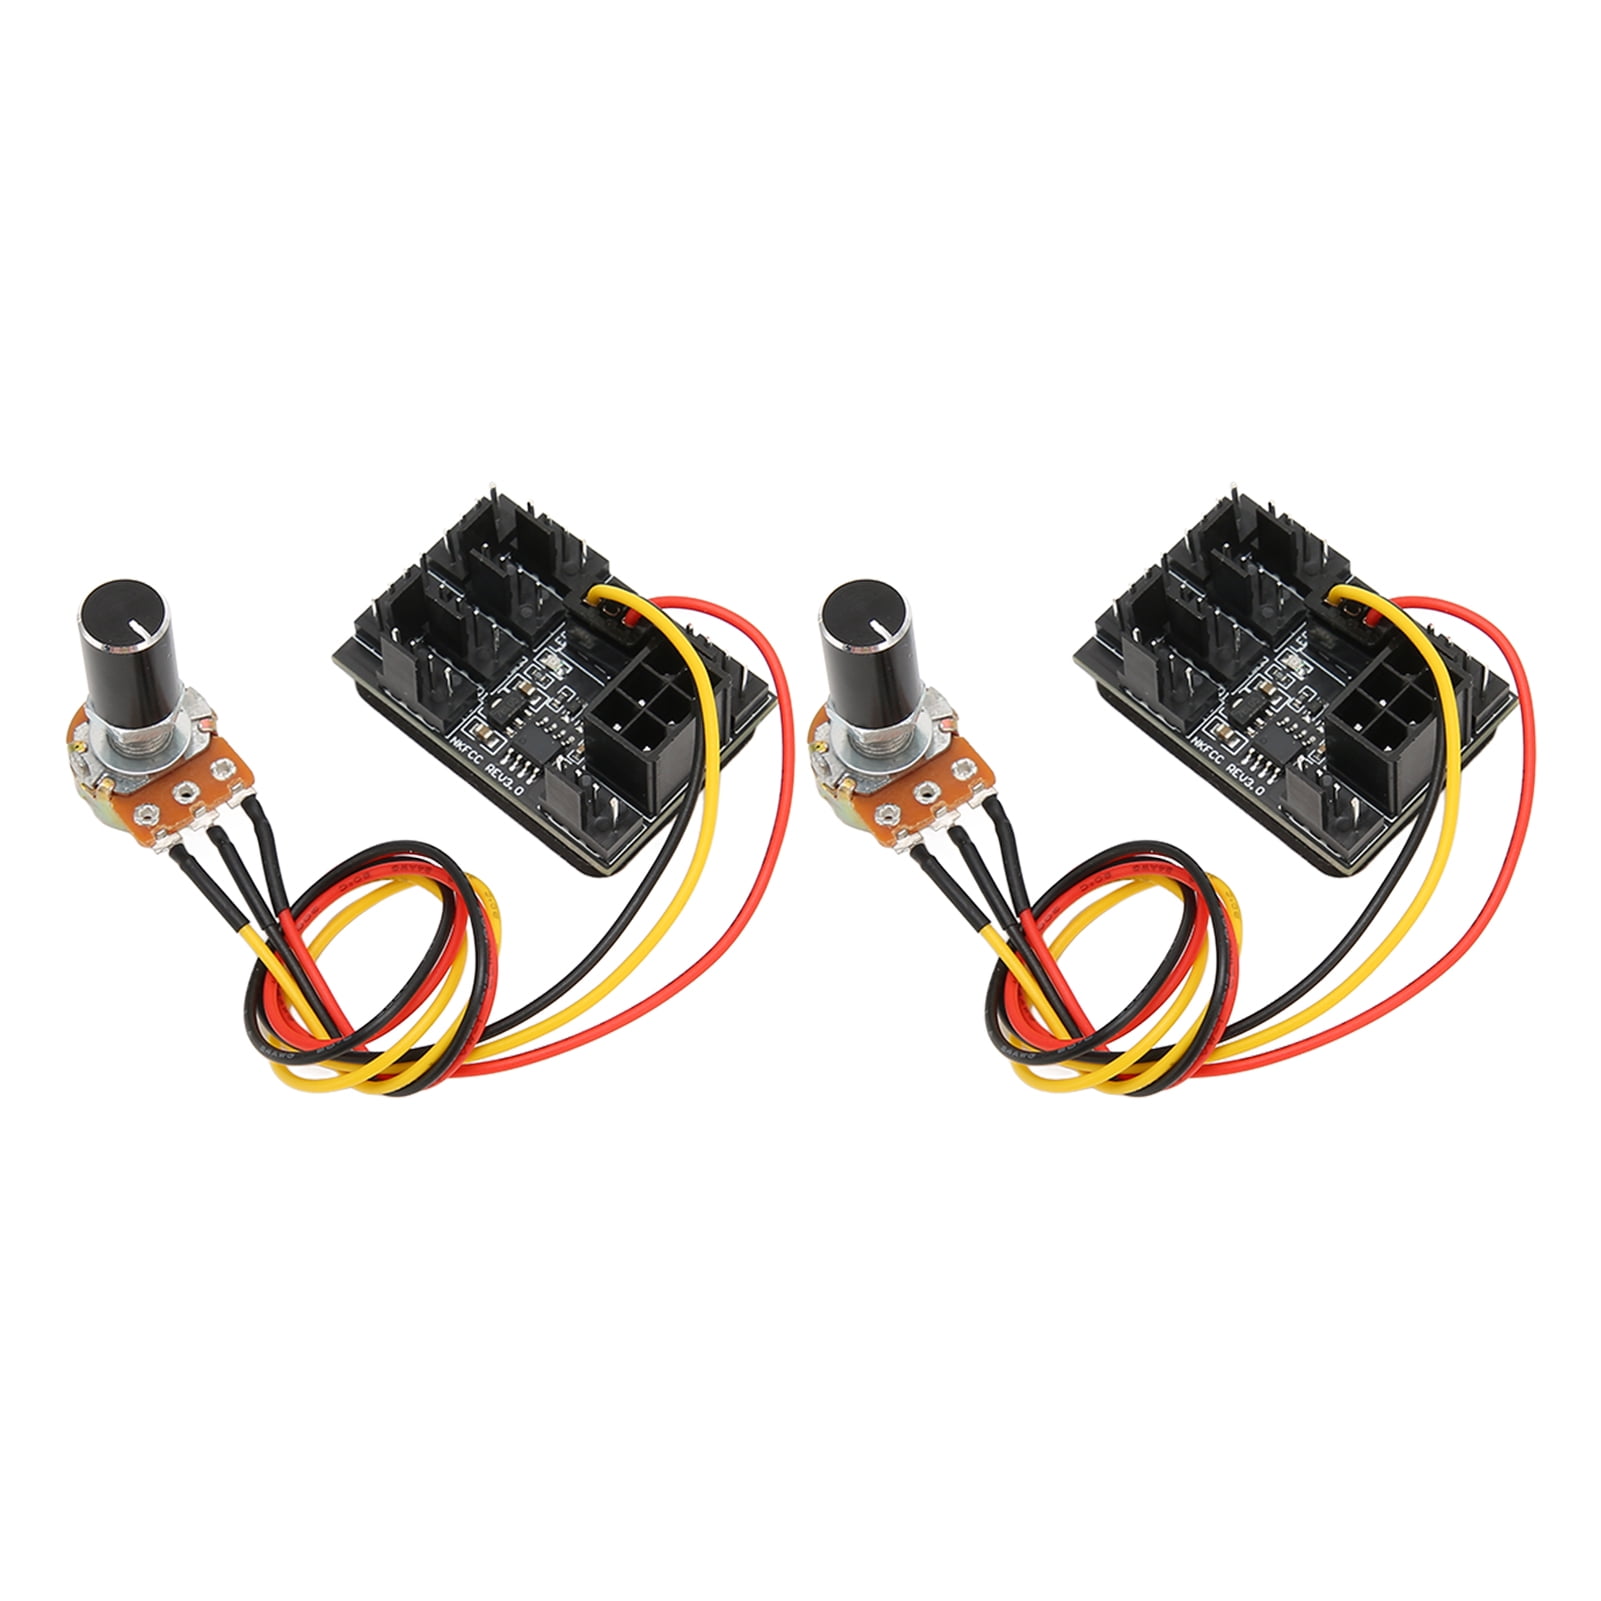 Fan Controller, DC12V Pin 4 Cooling Fan Hub Potentiometer Extension Cable 30CM For PC Case For Cooling Fan - Walmart.com